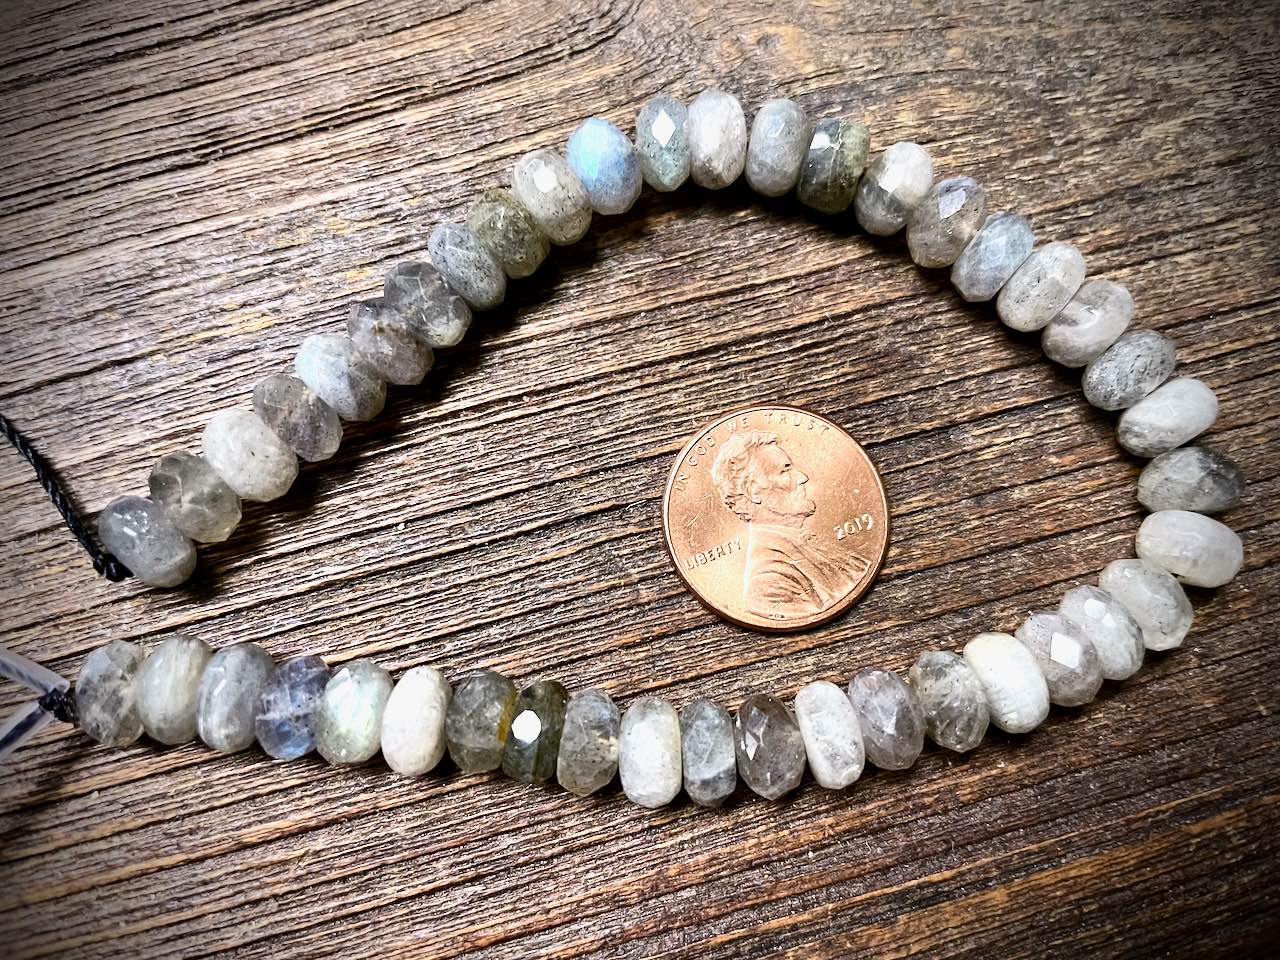 Labradorite Faceted Rondelle Bead Strand - 8mm x 5mm - 8"